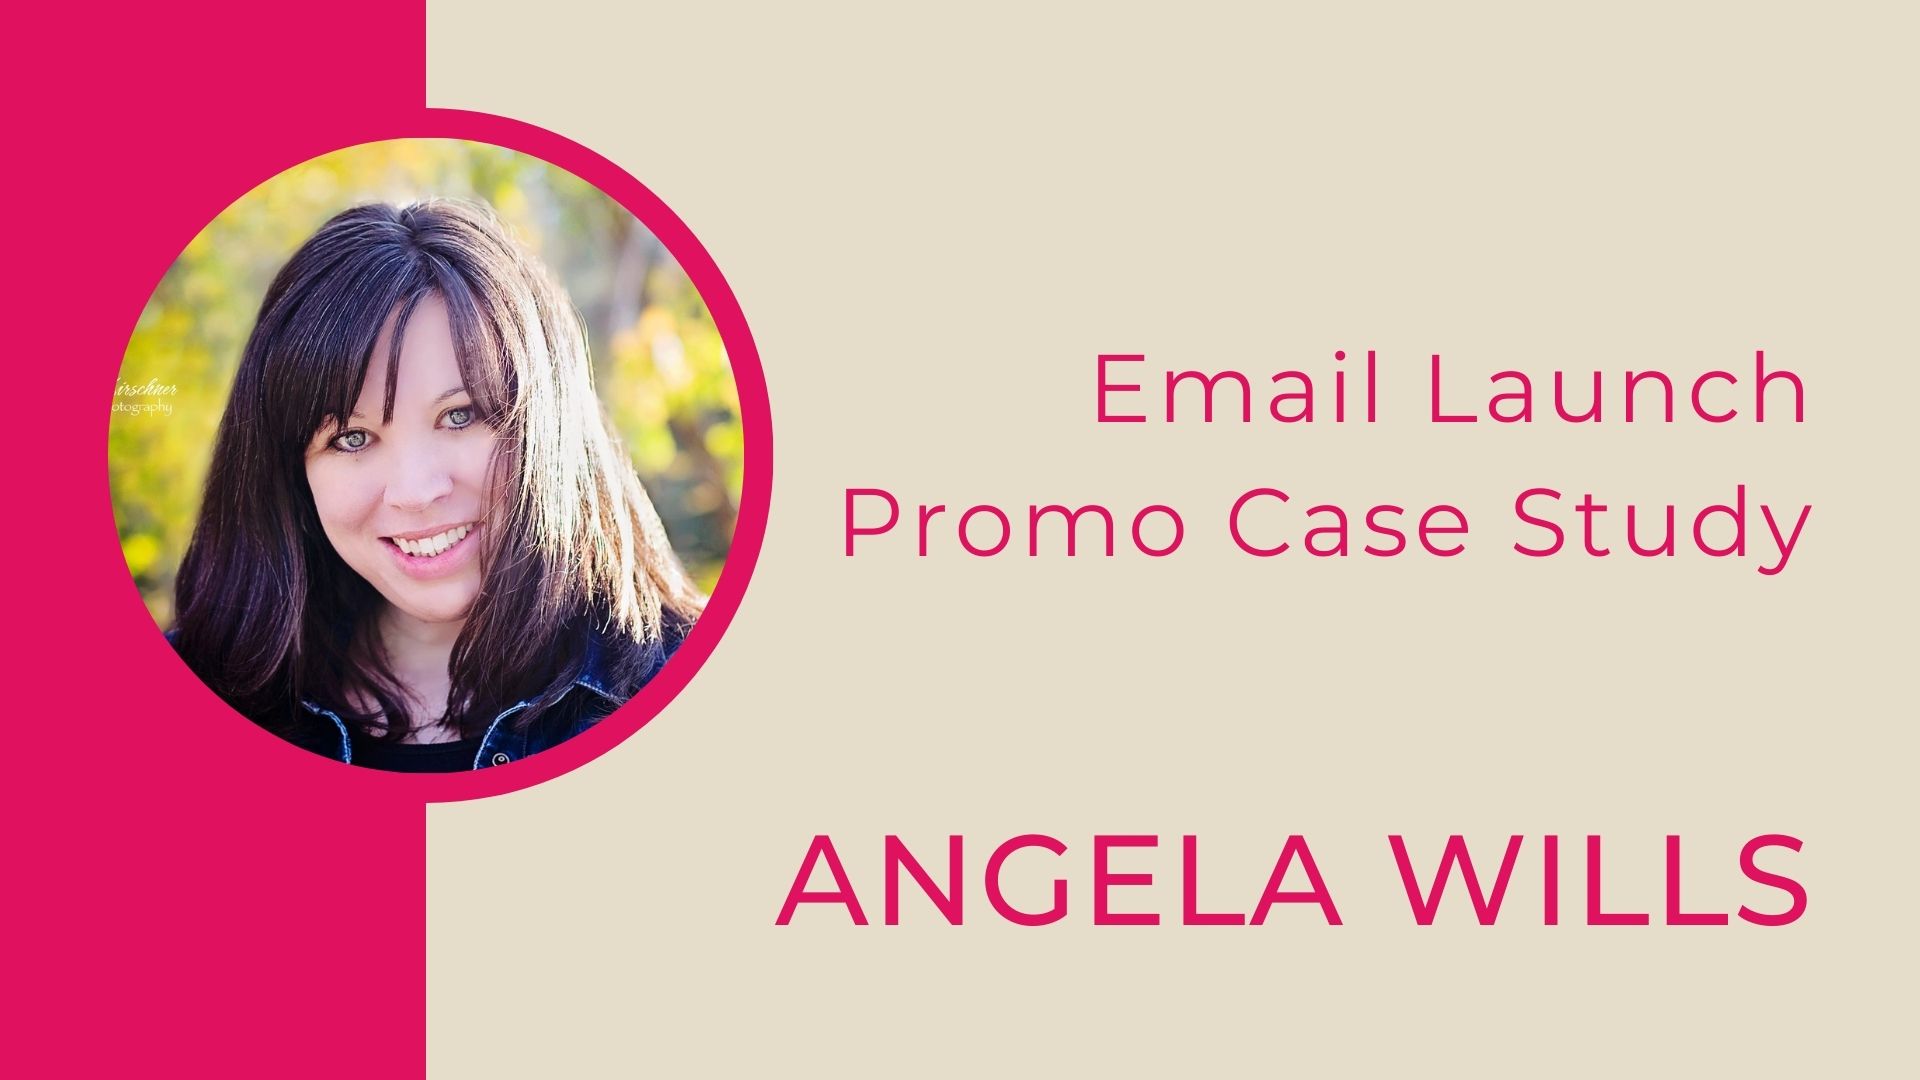 Angela Wills email launch case study